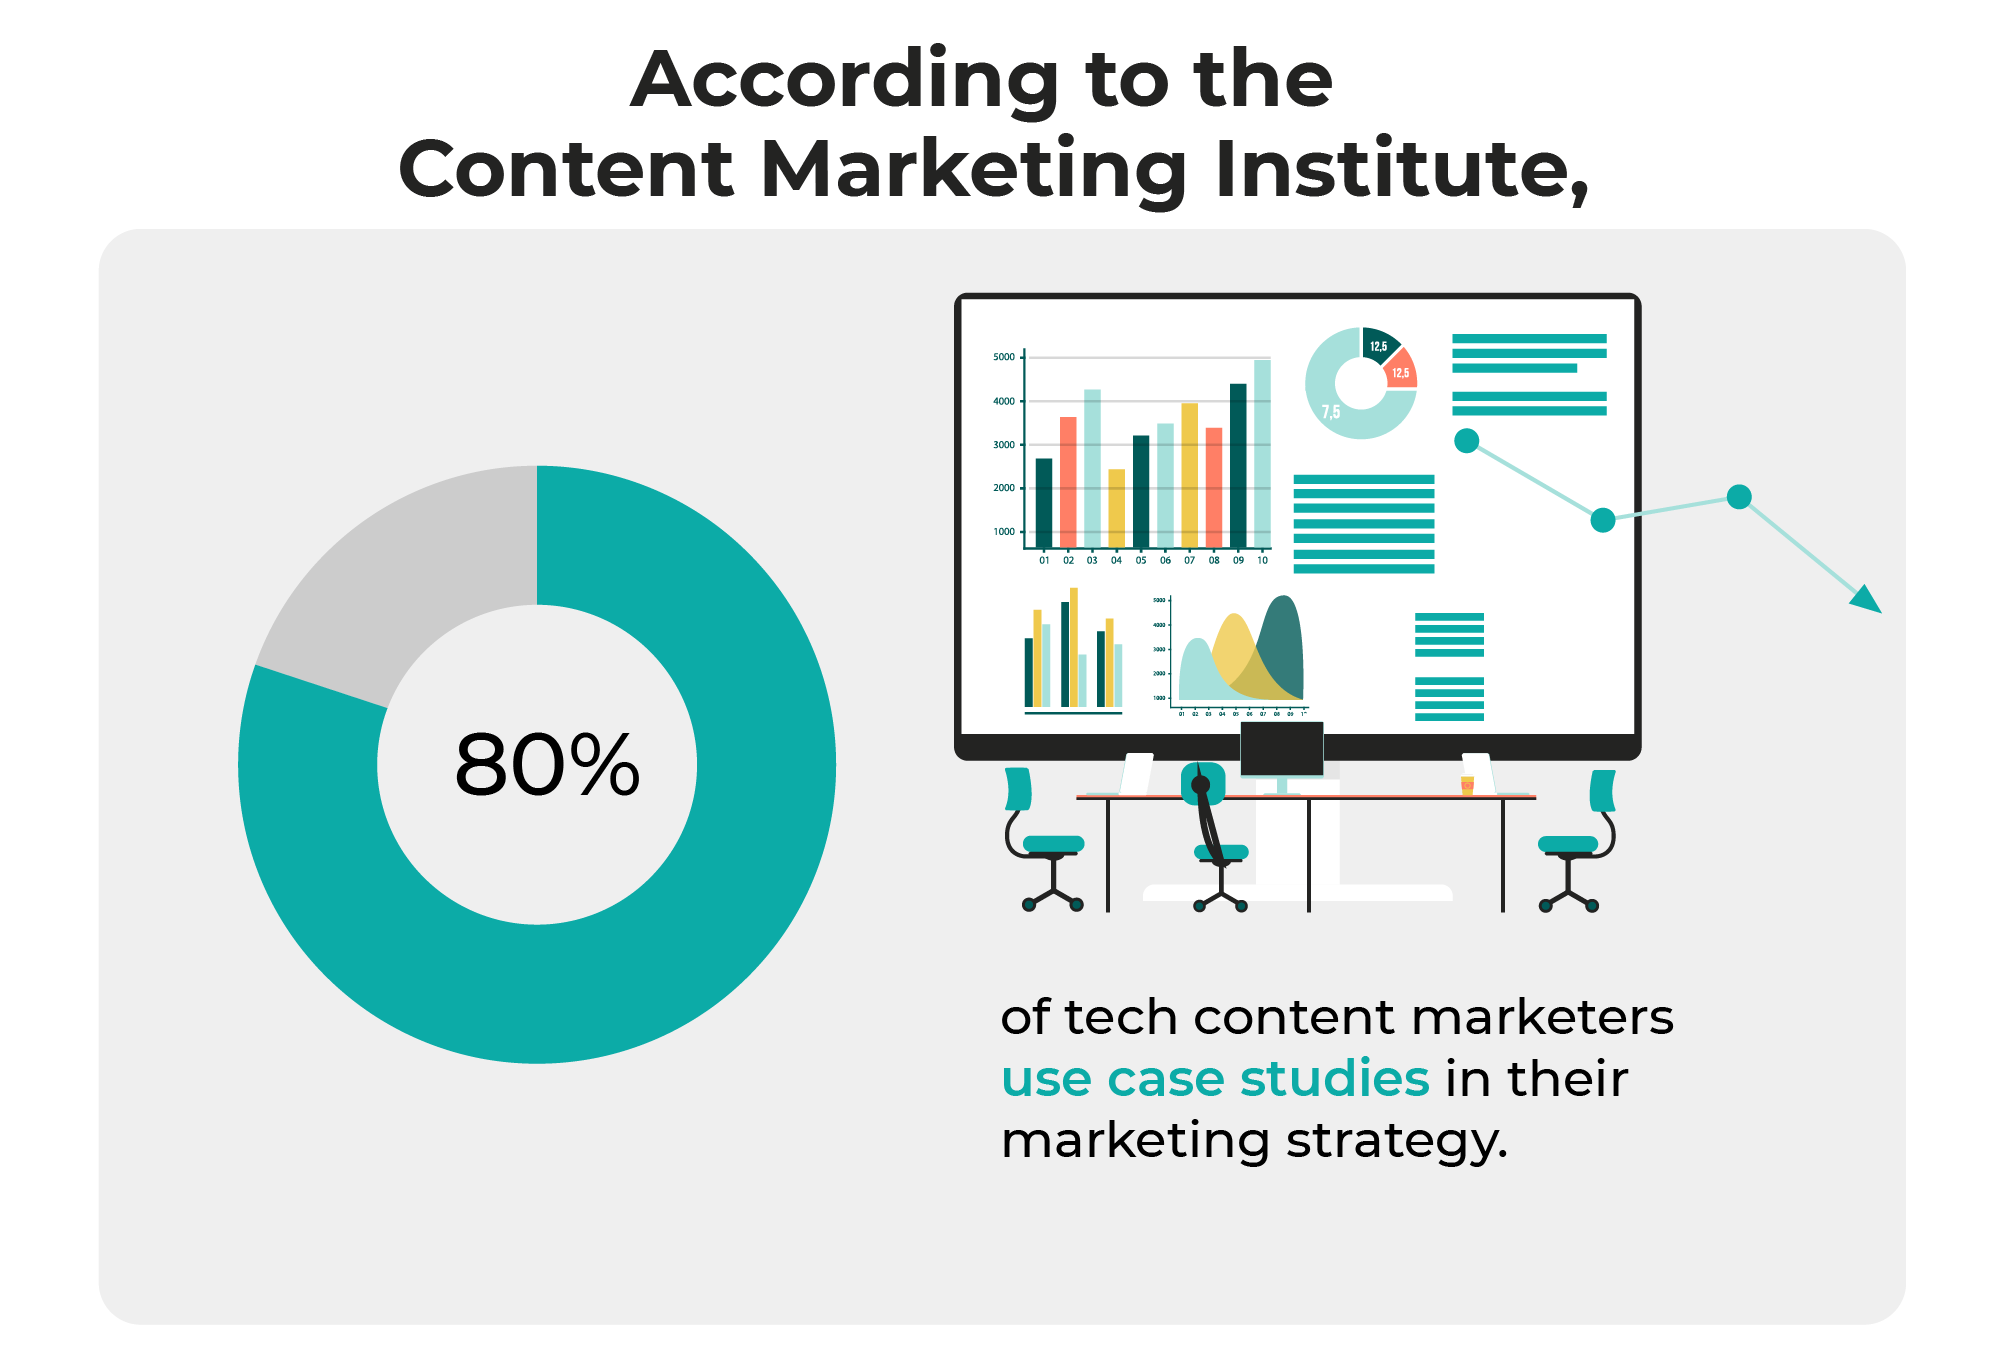 case study usage for tech content marketers